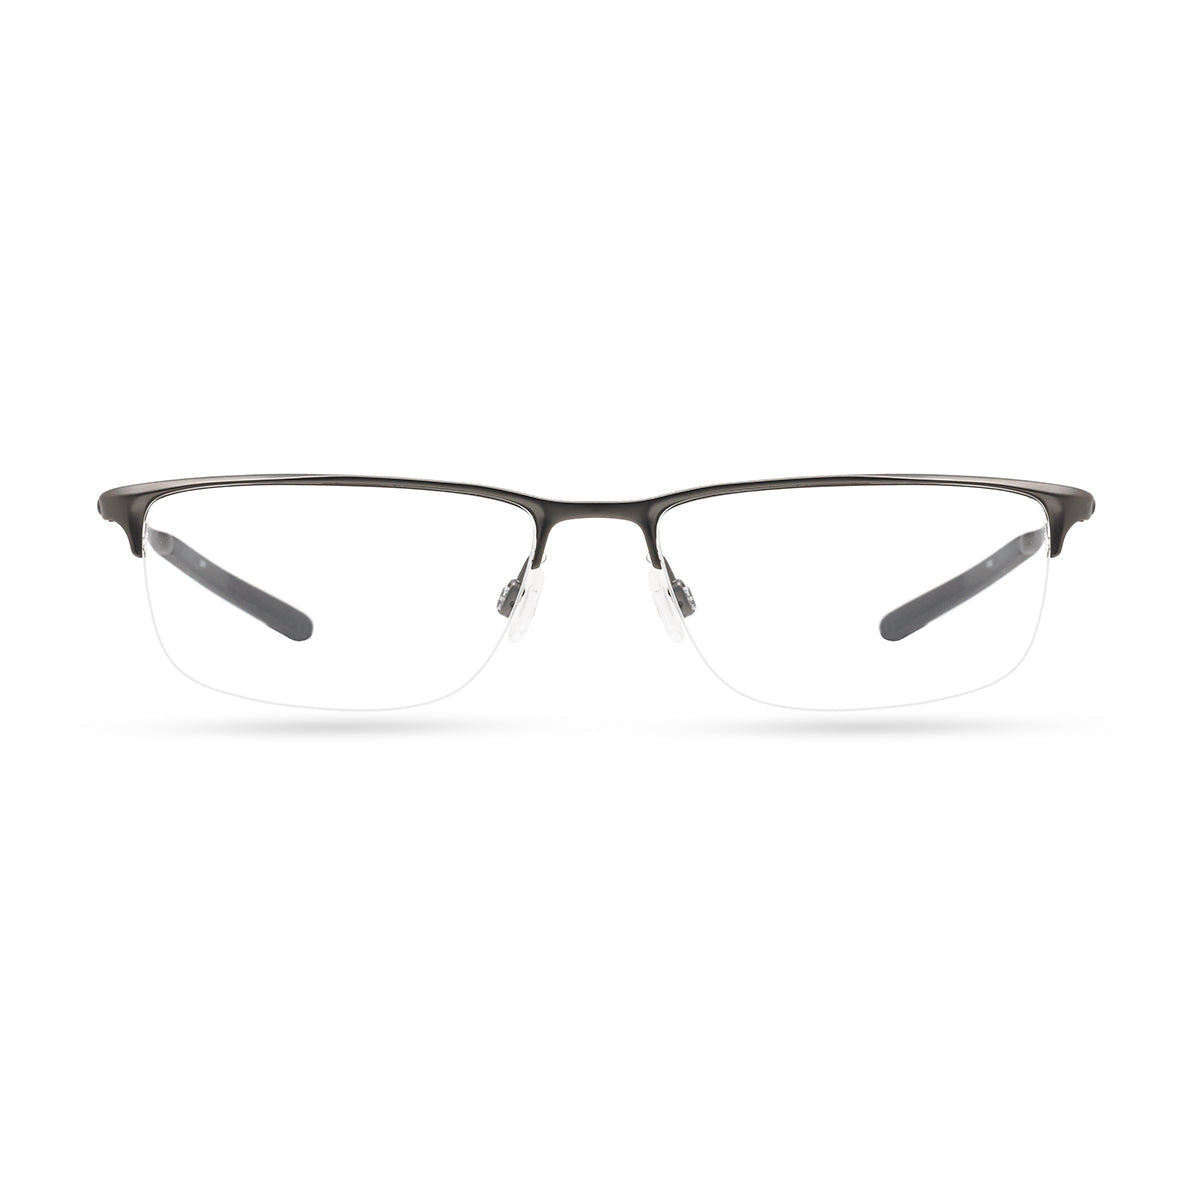 NIKE 6064 070 spectacle-frame